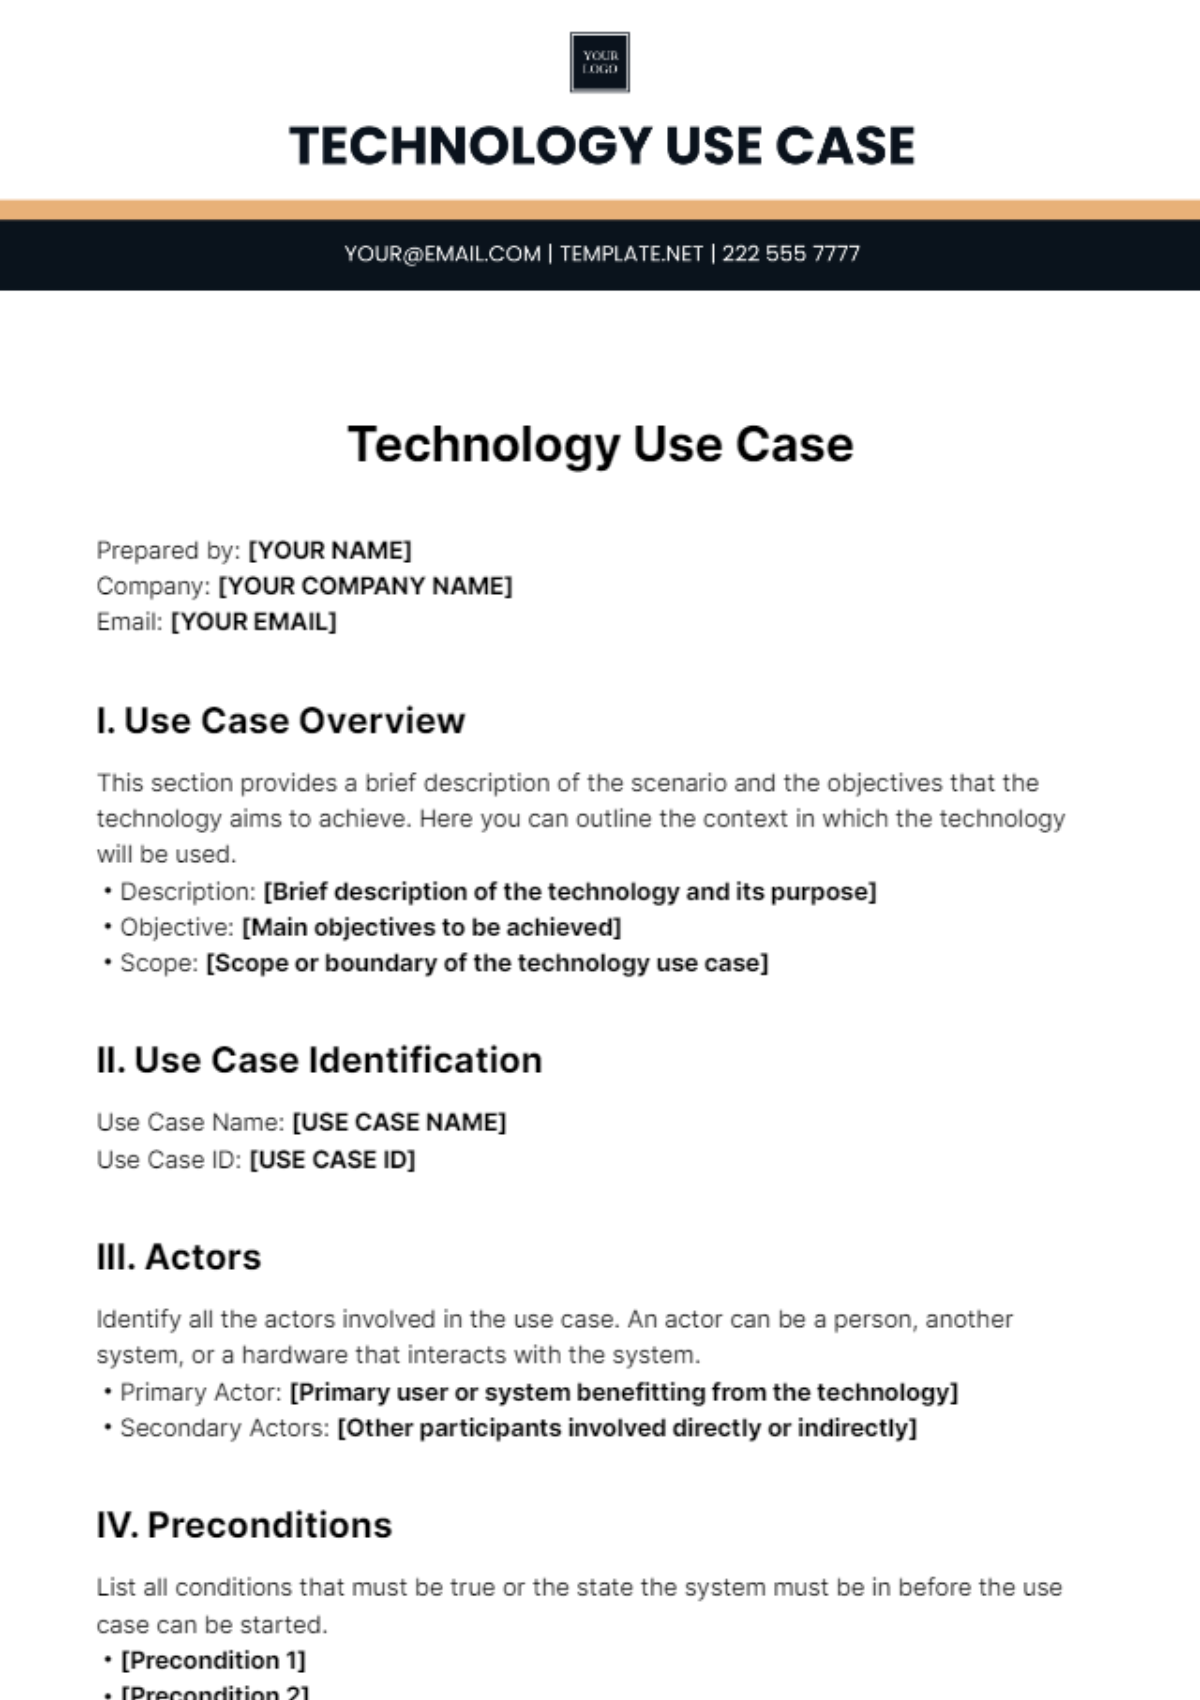 Technology Use Case Template